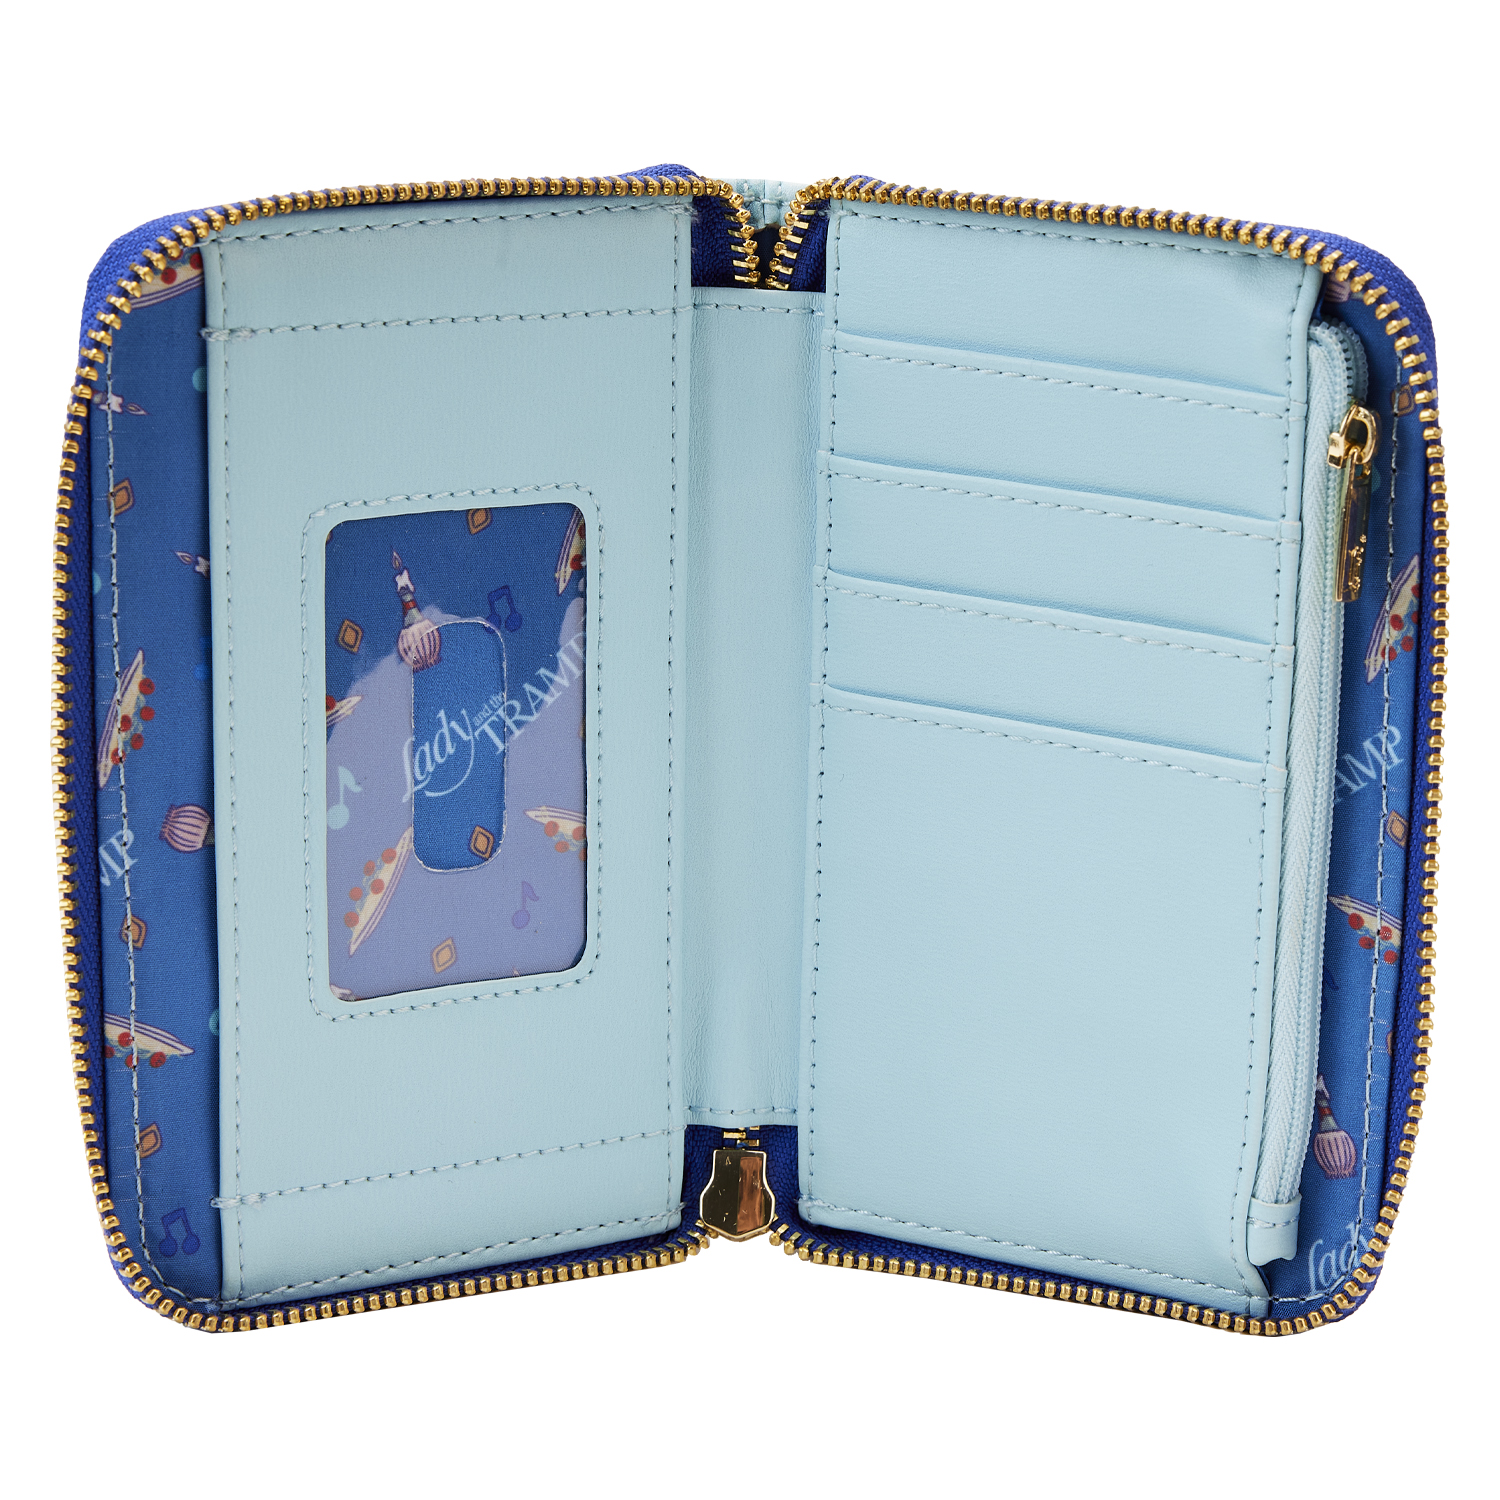 Buy Lady and the Tramp Book Zip Around Wallet at Loungefly.